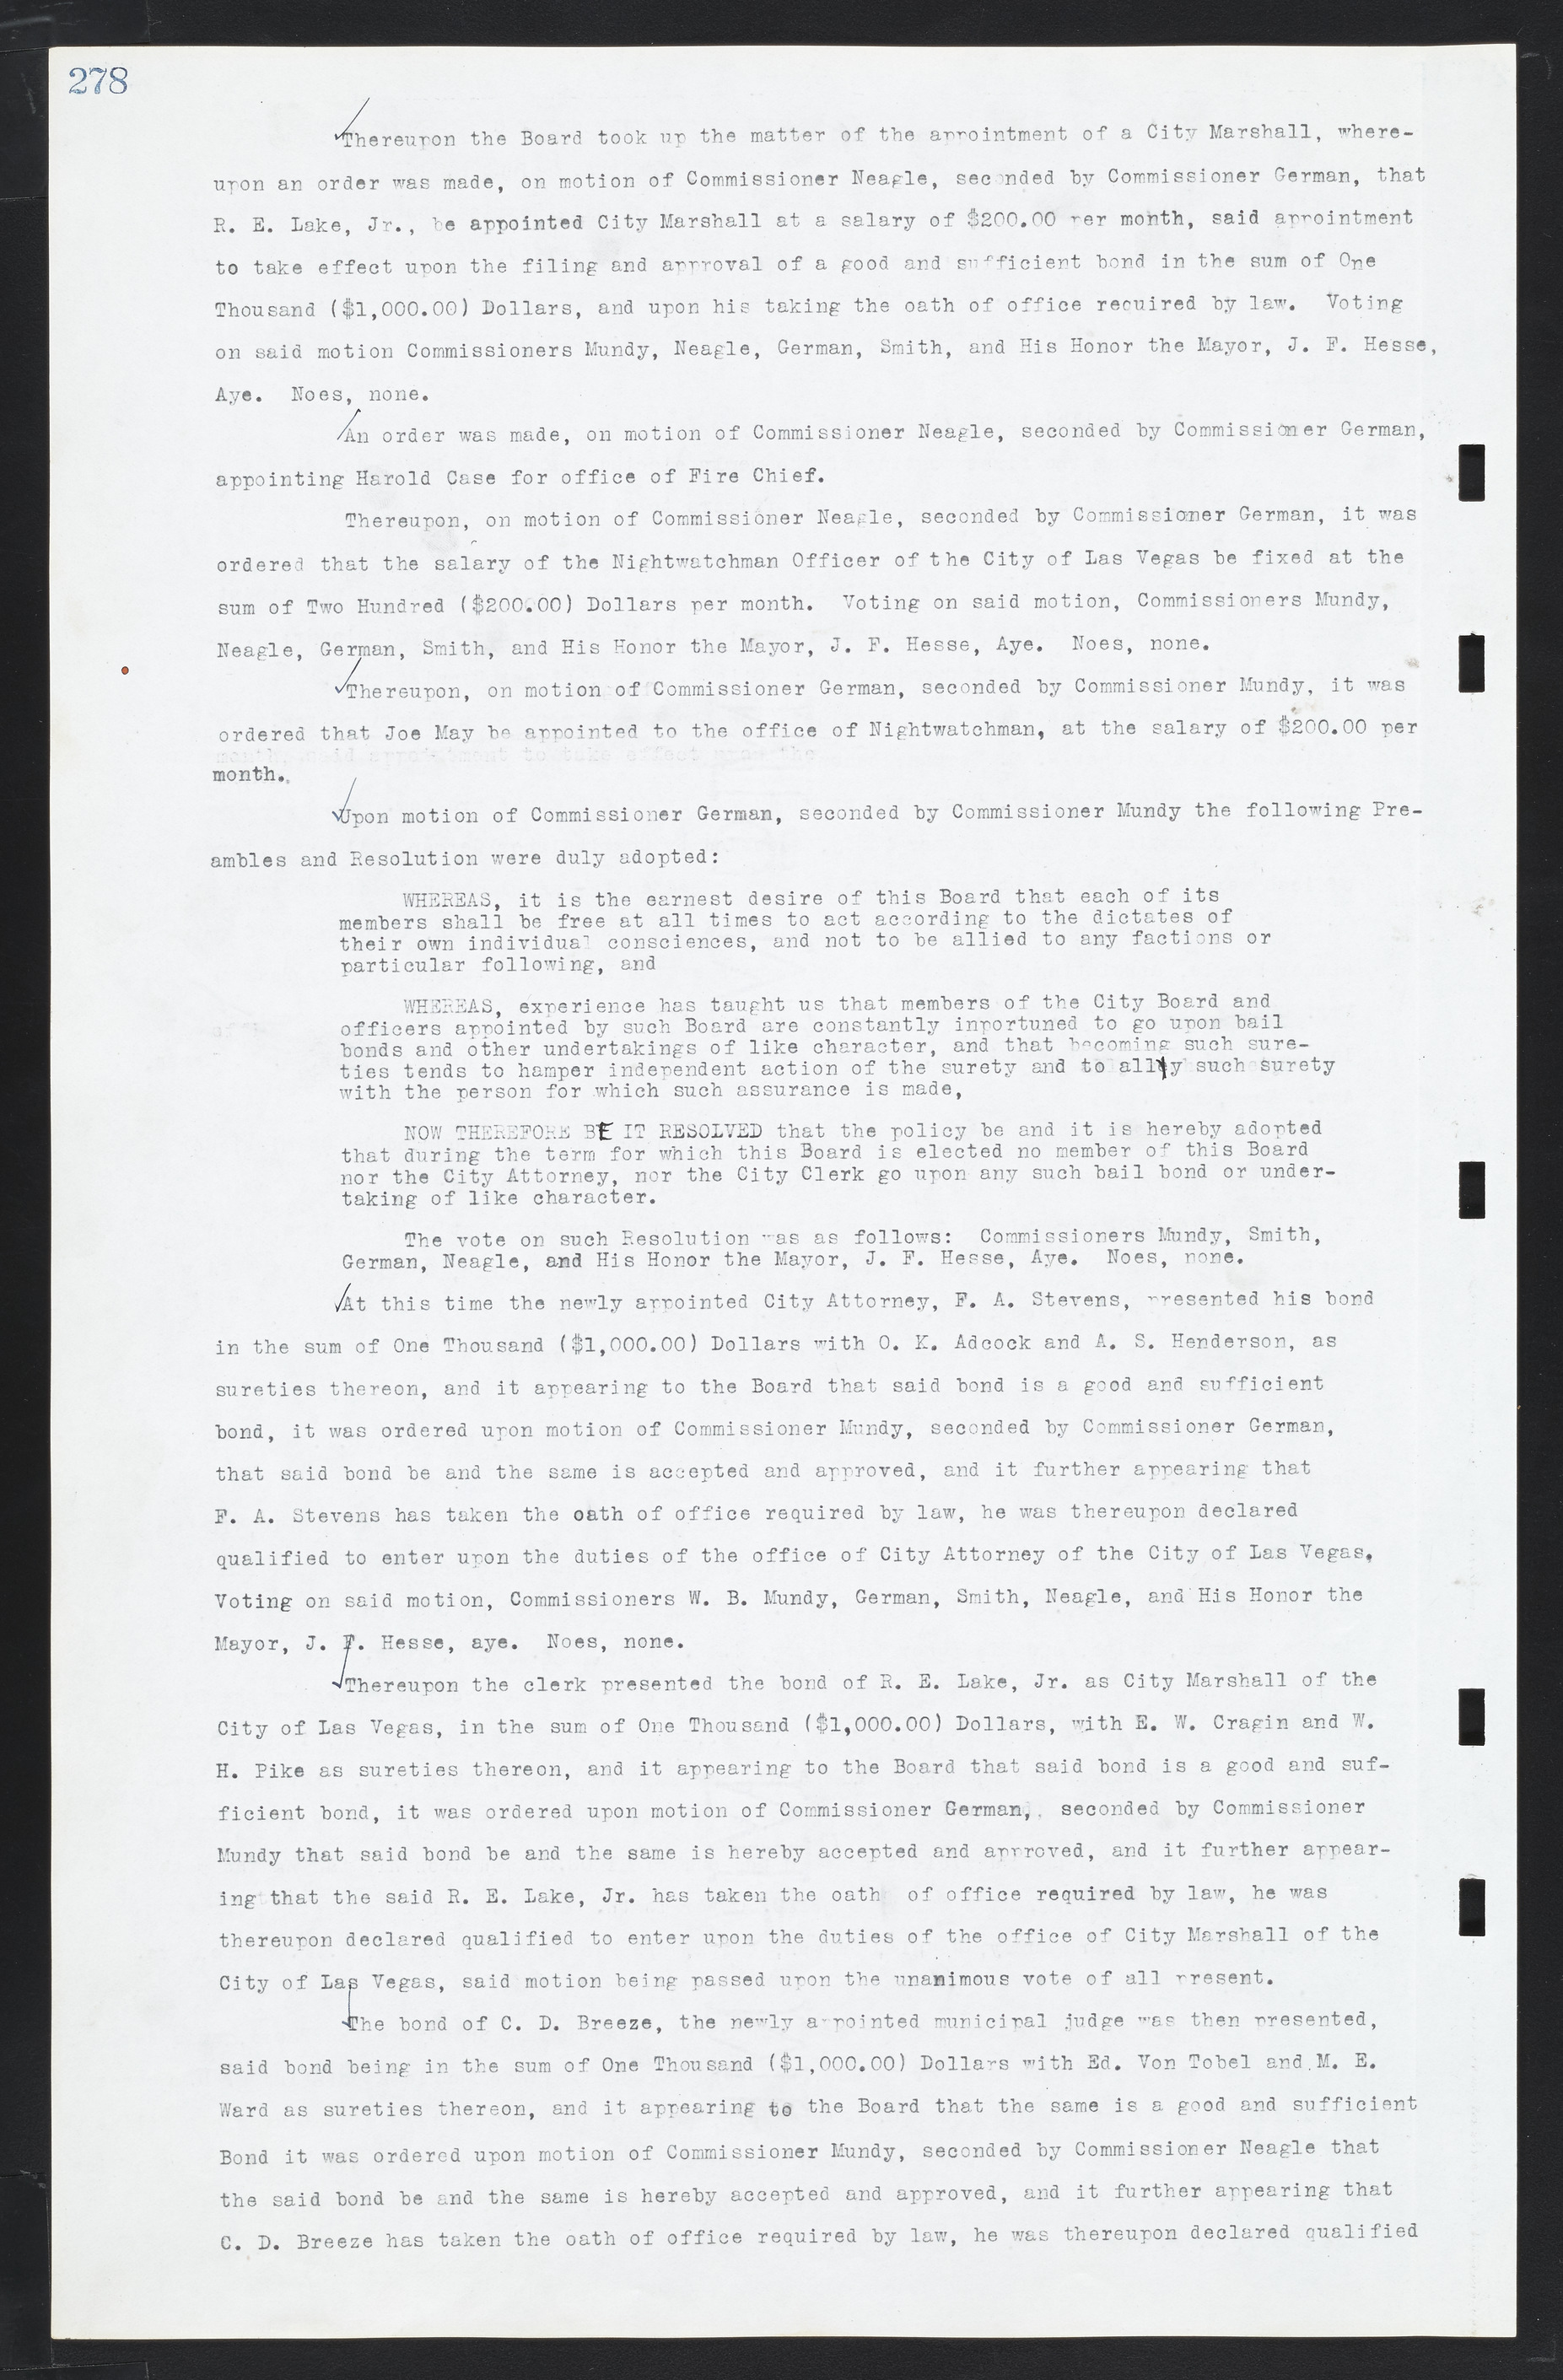 Las Vegas City Commission Minutes, March 1, 1922 to May 10, 1929, lvc000002-287